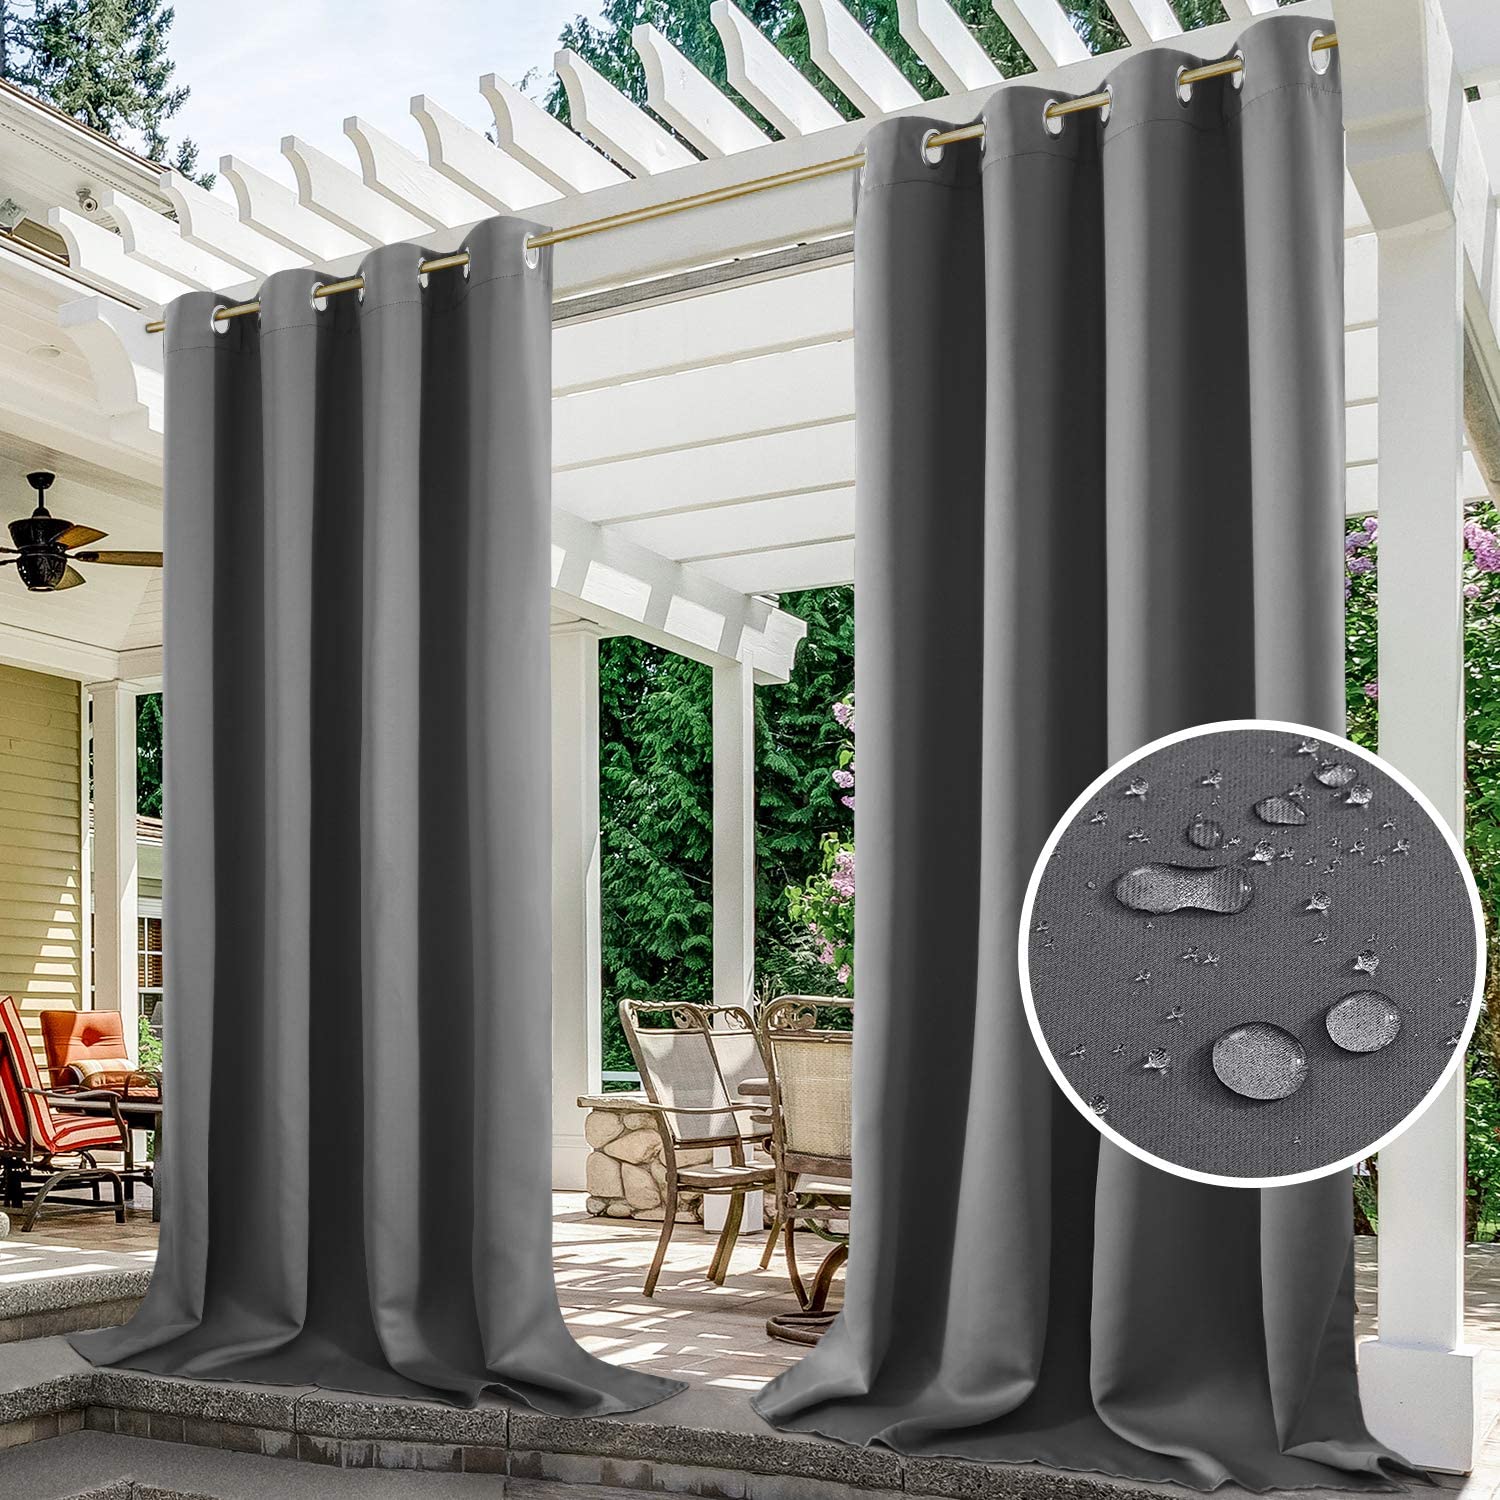 (4 Panel) Upgraded Outdoor Curtain Garden Patio Gazebo Sunscreen Blackout Curtains, Thermal Insulated White Curtains with Grommet | Waterproof& Windproof&UV-protection& Mildew Resistant,Grey 54*96in - image 2 of 8